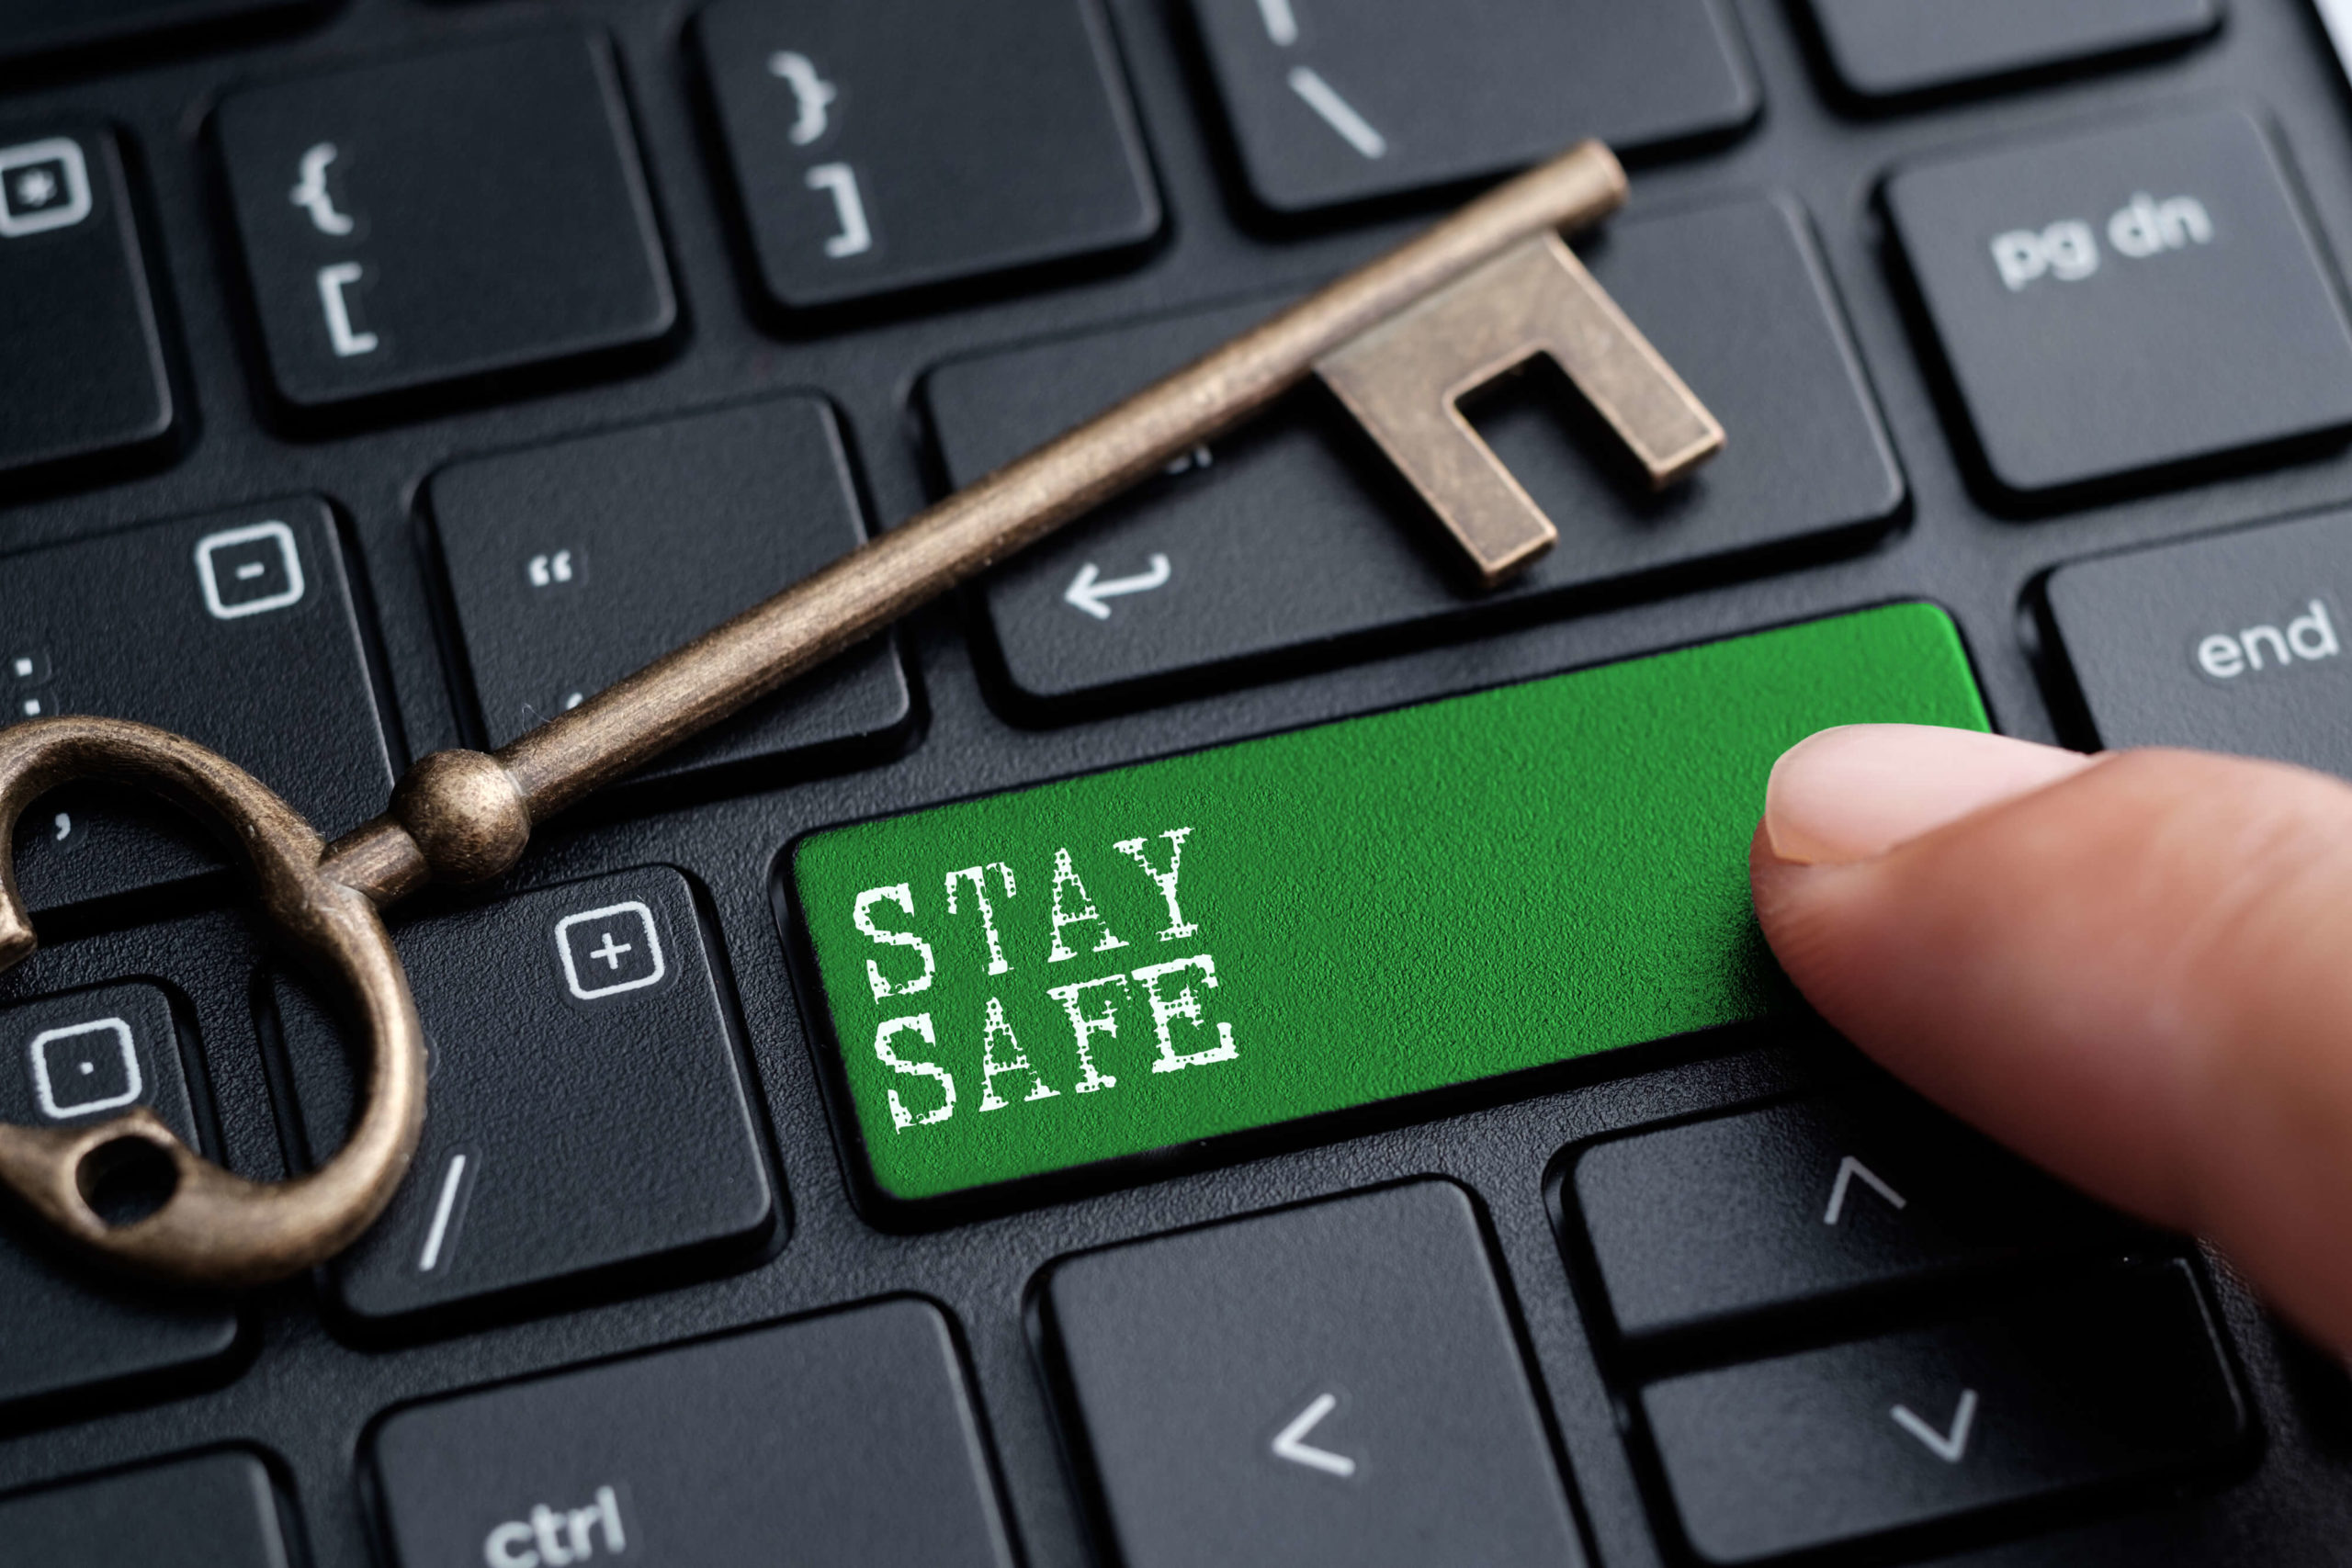 A green button on a keyboard with the words 'STAY SAFE' is pressed by a finger. The image represents the search query 'How to keep your online privacy safe'.